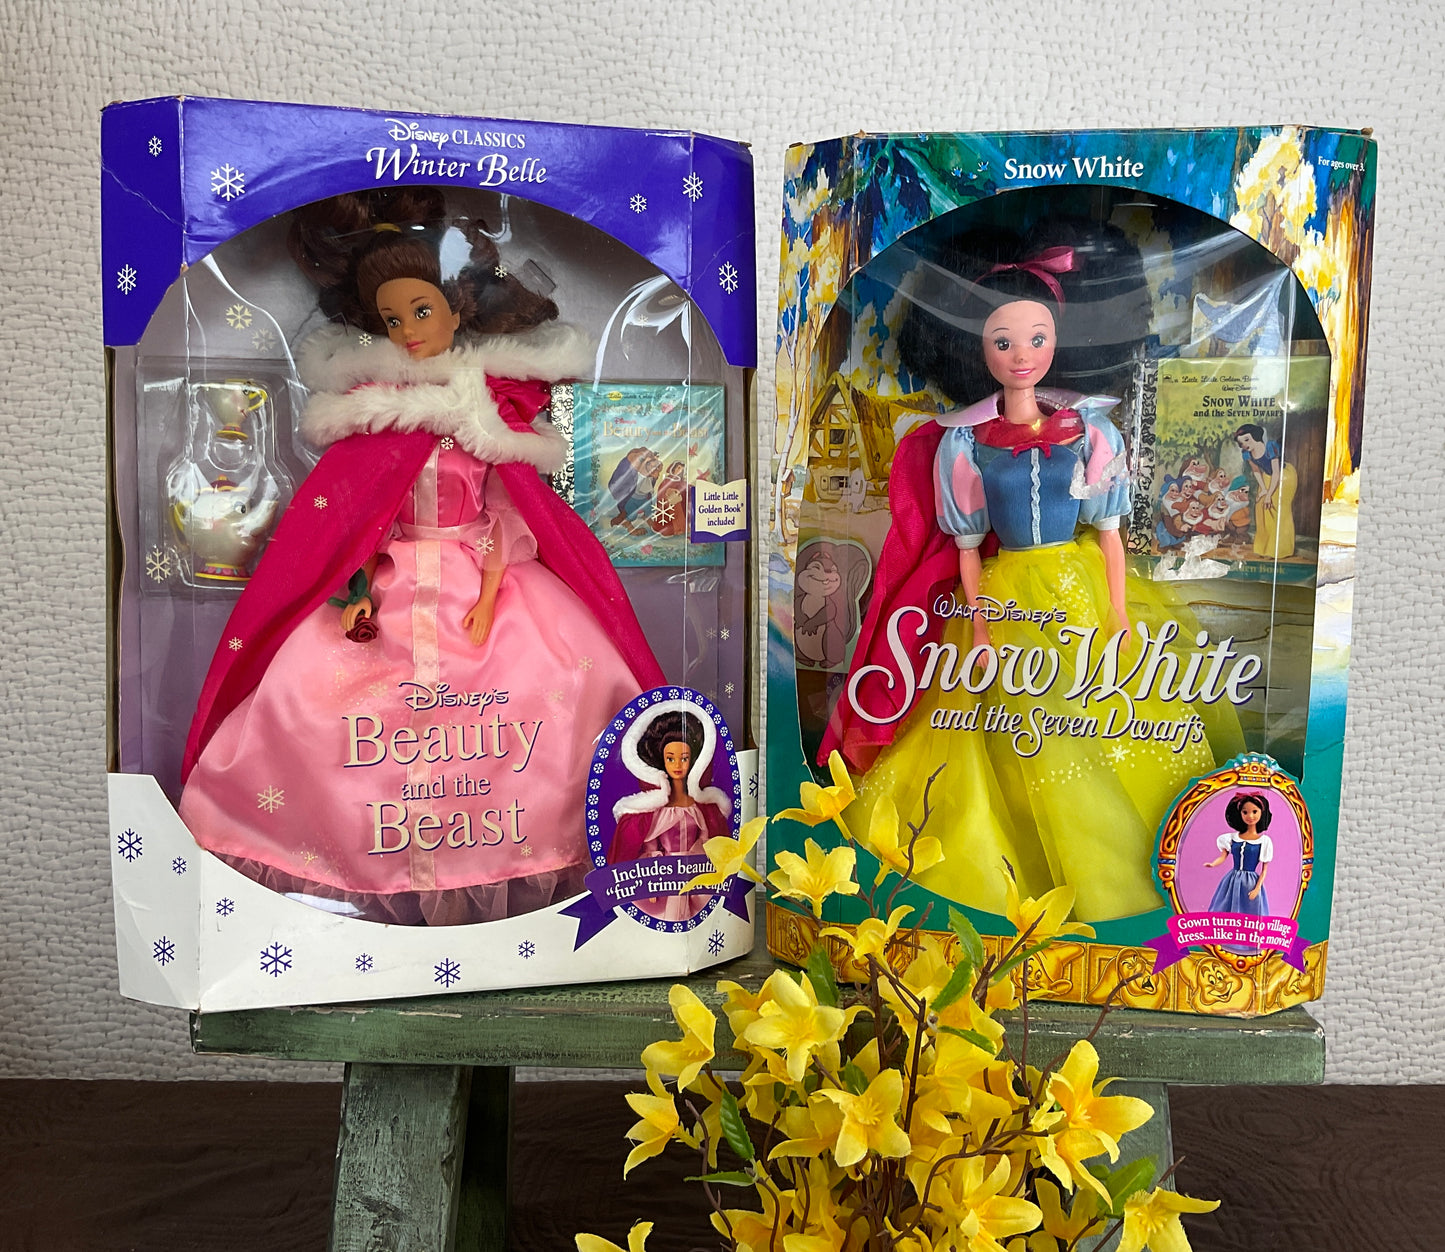 1992 Disney's Beauty and the Beast Winter Belle & 1992 Snow White and the Seven Dwarfs